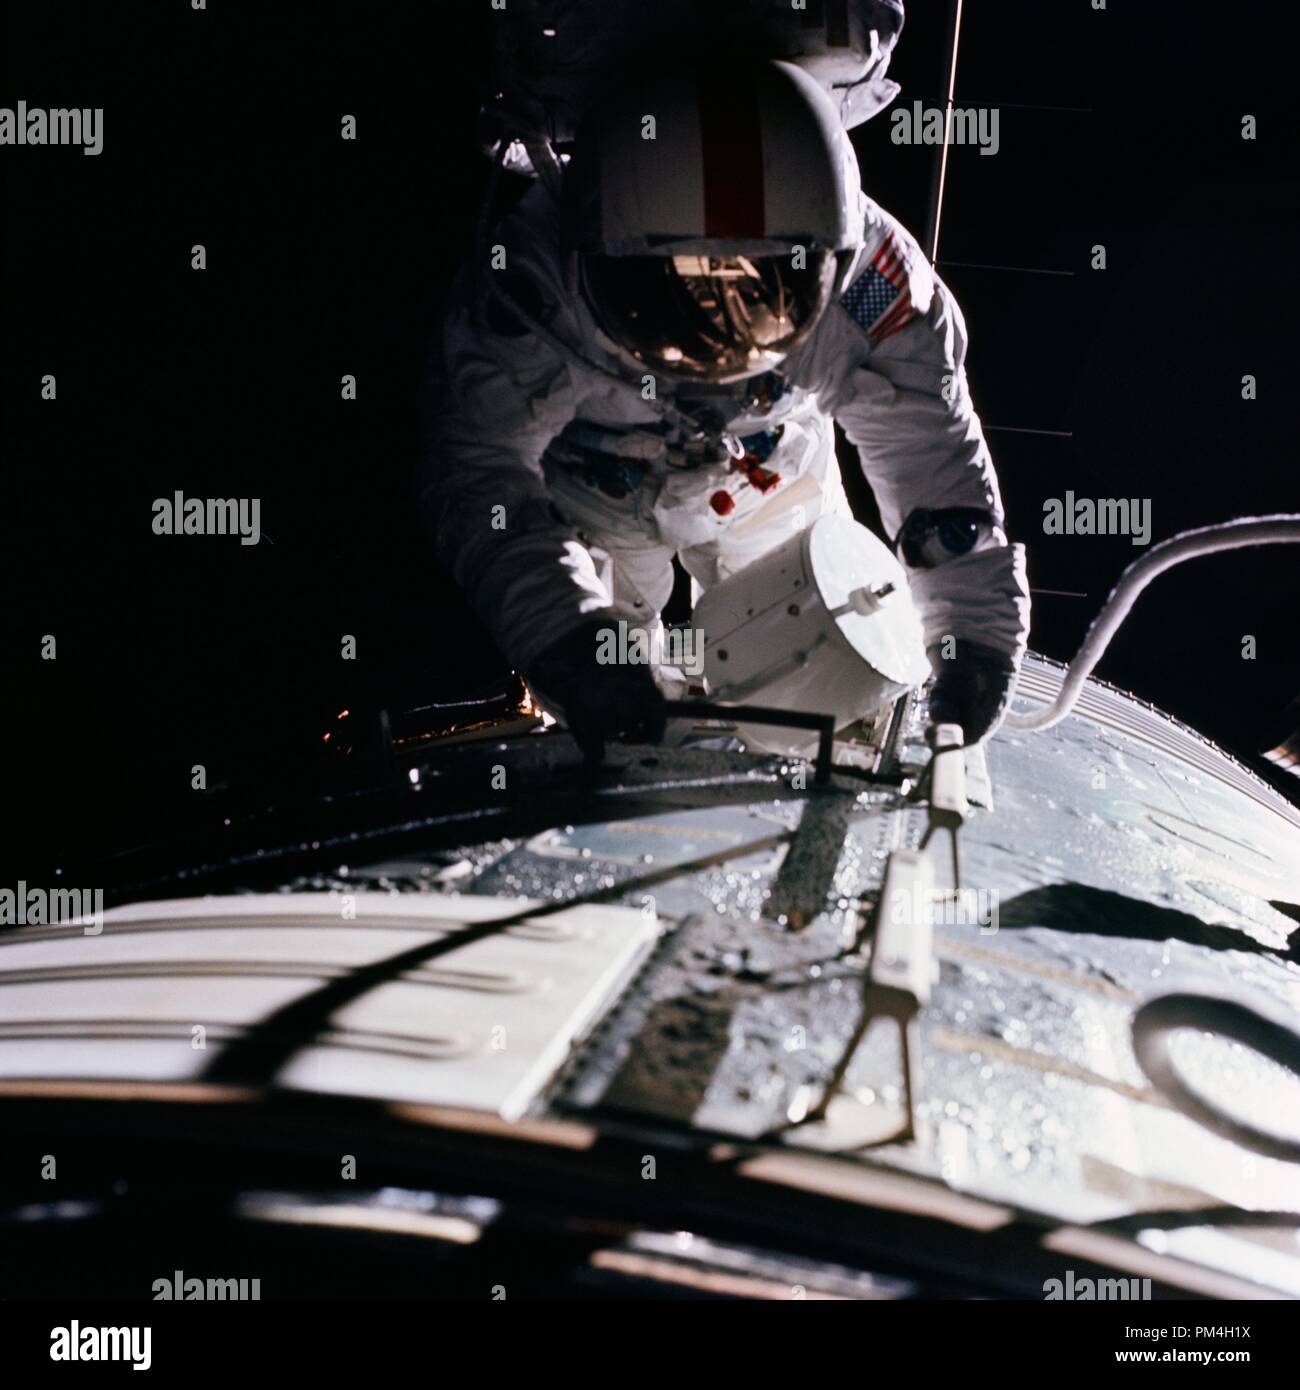 (17 Dec. 1972) --- Astronaut Ronald E. Evans is photographed performing extravehicular activity during the Apollo 17 spacecraft's trans-Earth coast. During his EVA, command module pilot Evans retrieved film cassettes from the Lunar Sounder, Mapping Camera, and Panoramic Camera. The cylindrical object at Evans' left side is the Mapping Camera cassette. The total time for the trans-Earth EVA was one hour seven minutes 18 seconds, starting at ground elapsed time of 257:25 (2:28 p.m.) and ending at ground elapsed timed of 258:42 (3:35 p.m.) on Sunday, Dec. 17, 1972.  File Reference # 1003 182THA Stock Photo